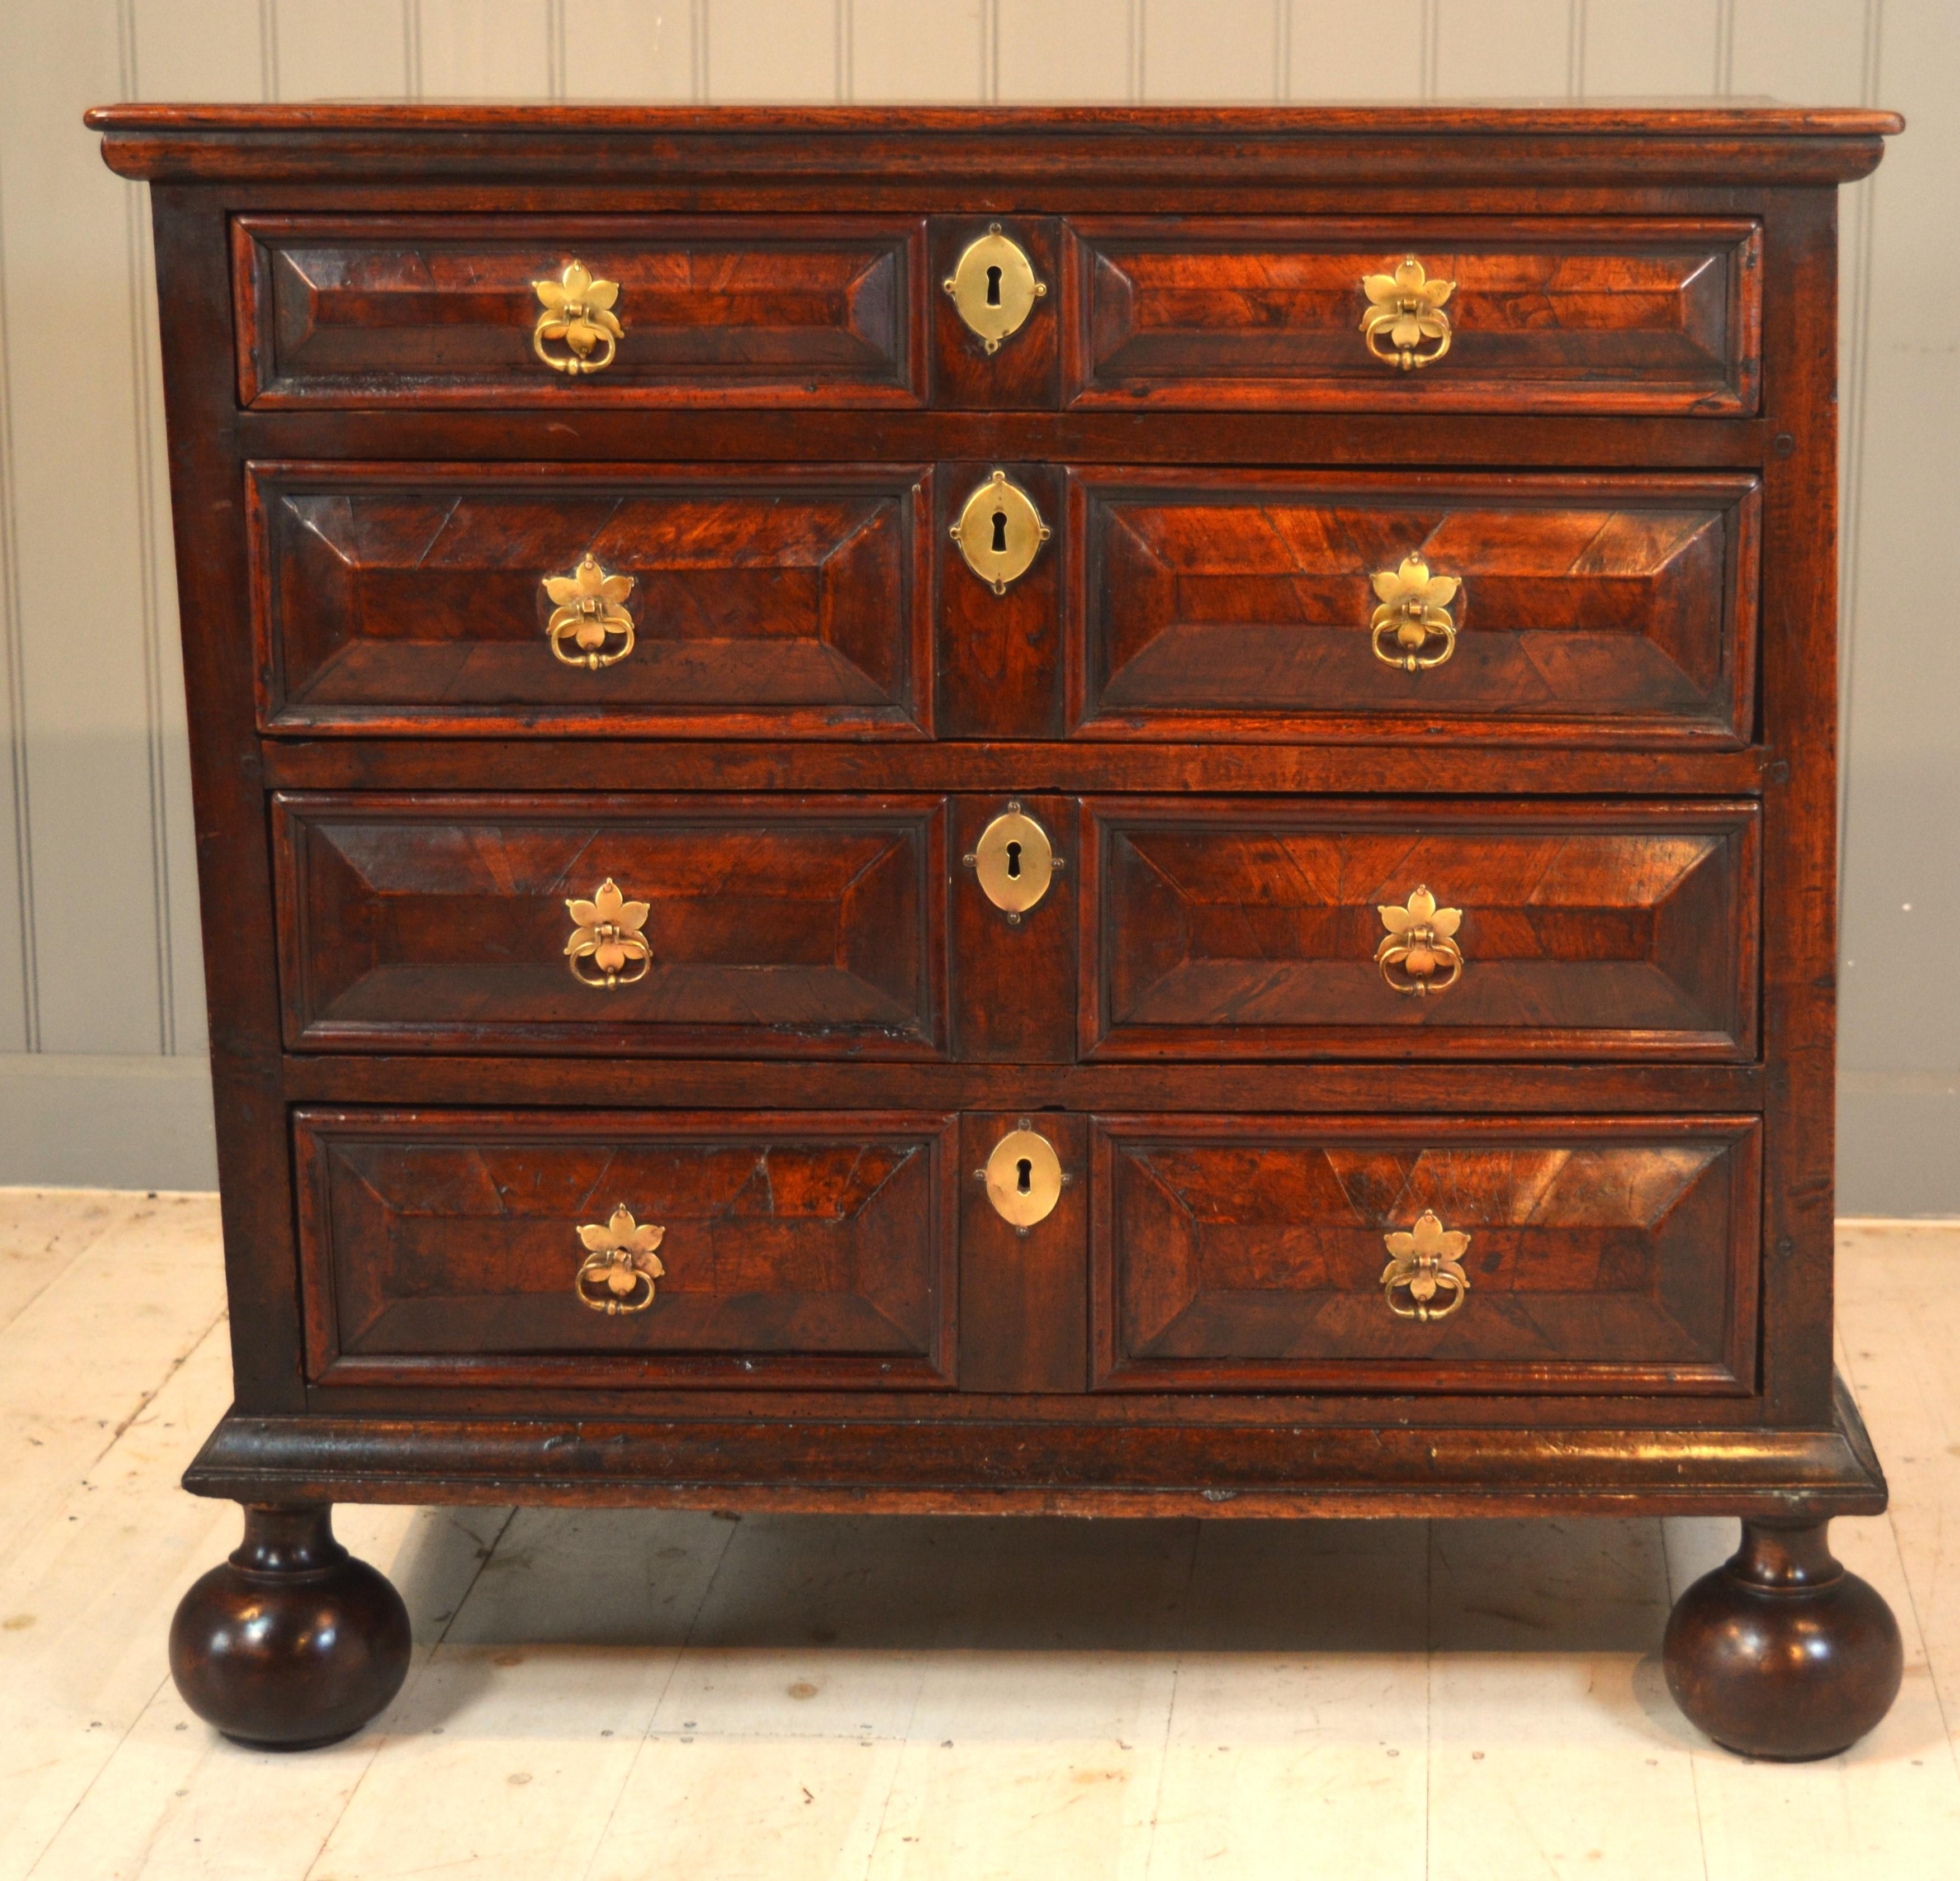 Here we have a very early piece of walnut furniture of small size in oak elm and walnut .The chest has elm sides, oak frame oak top and oak drawer linings . The drawers are on side runners as most early framed furniture is ,the front of the chest